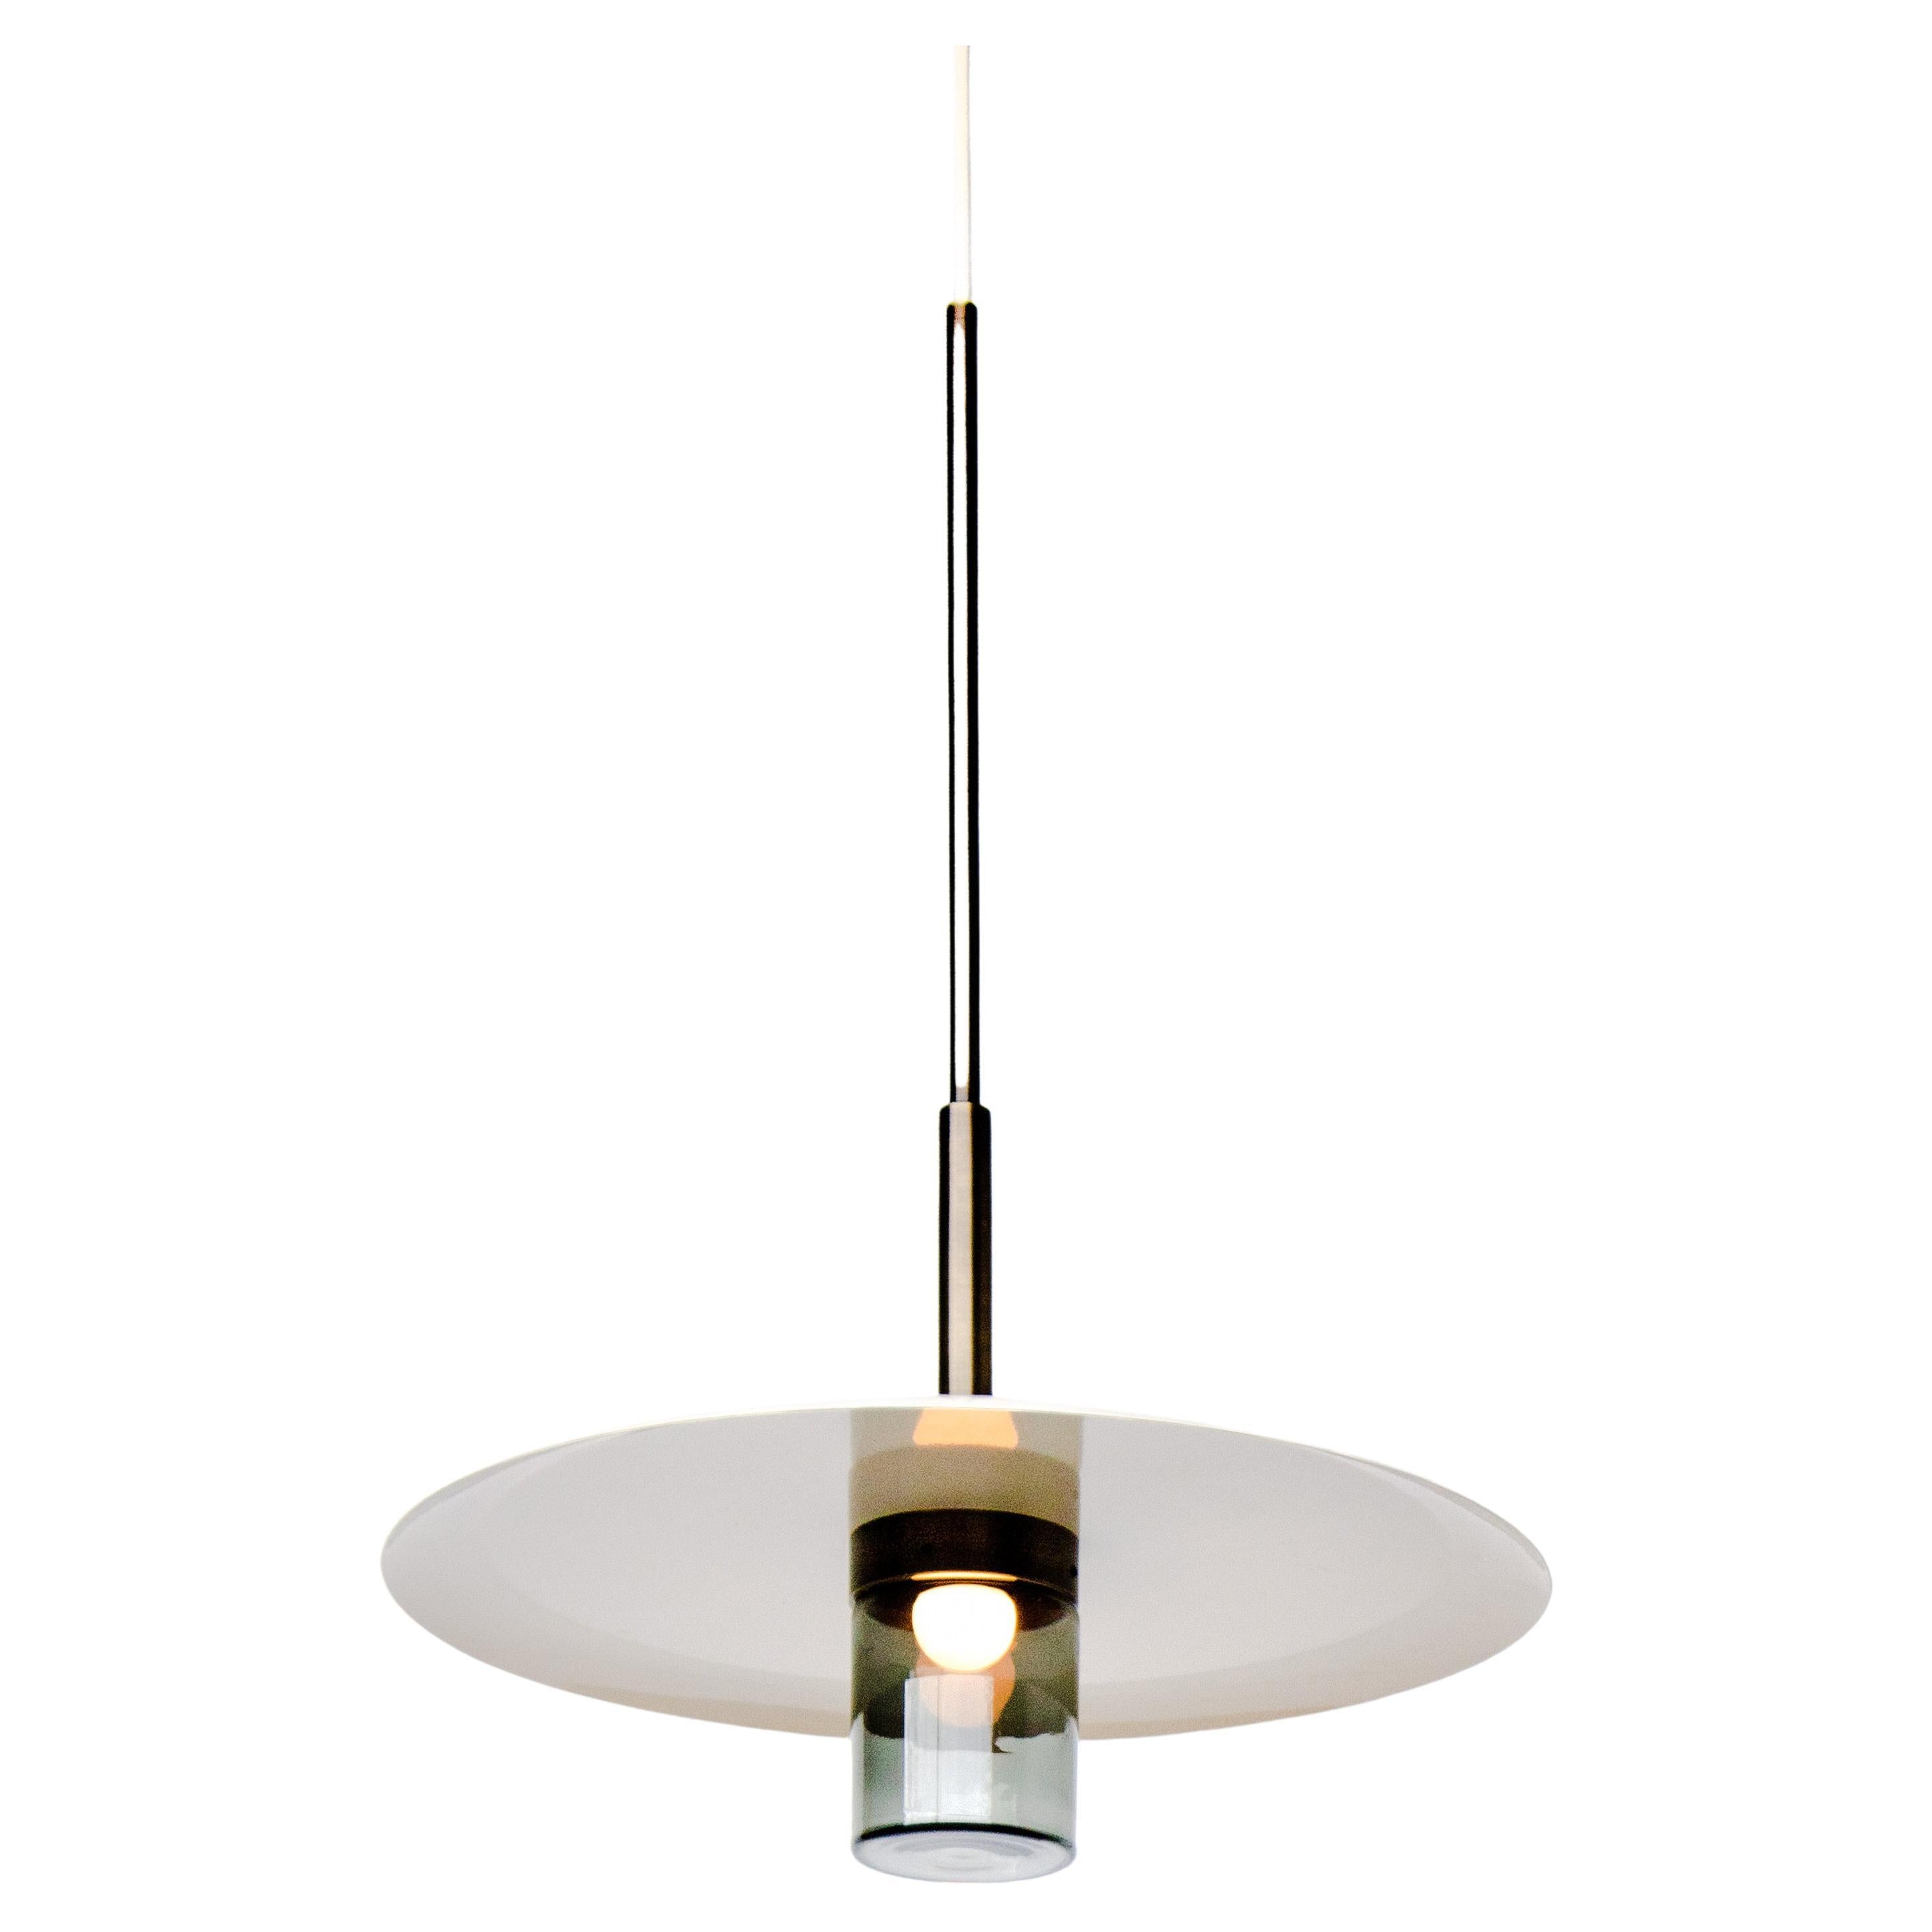 Arthur Pendant with a Powder-Coated Shade, Blonde Patina and Smoked Glass